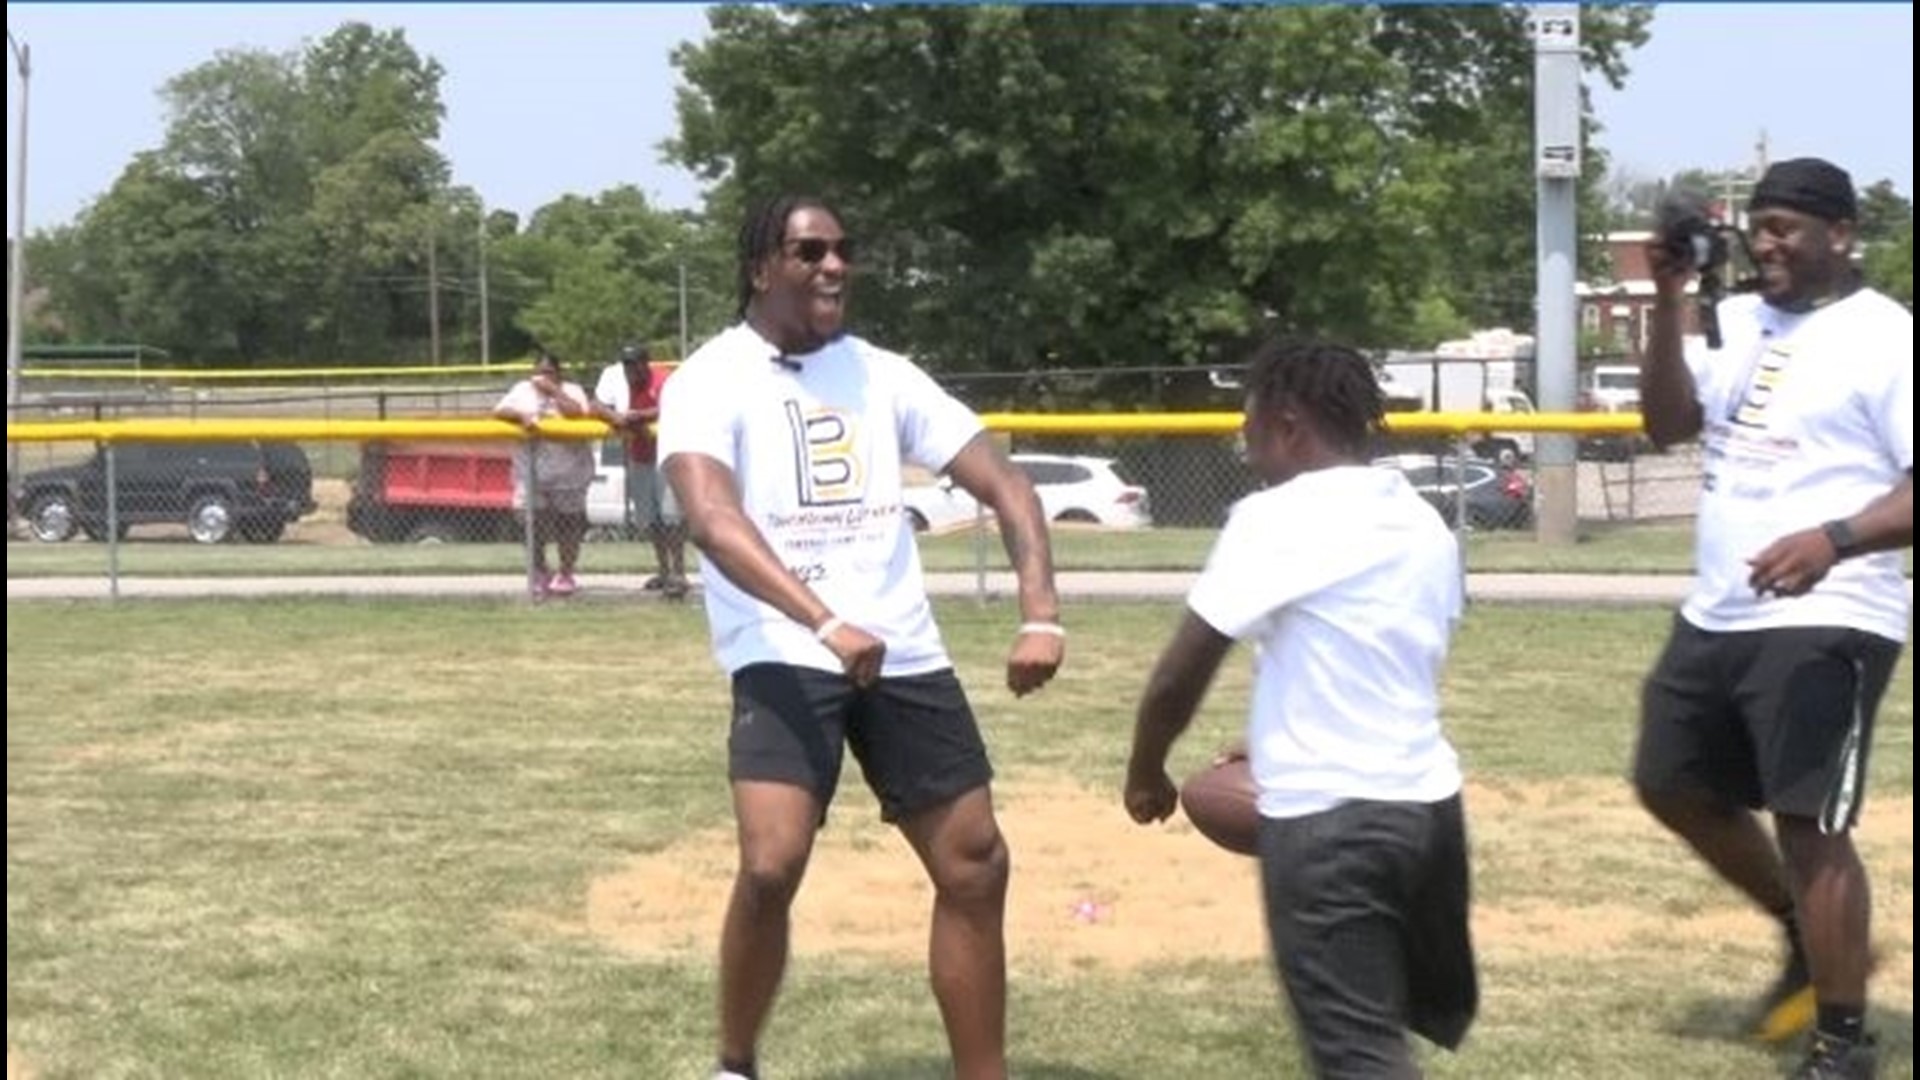 Mizzou football star Luther Burden is giving back to his hometown. He hosted a youth football camp Saturday at the Herbert Hoover Boys & Girls Club.